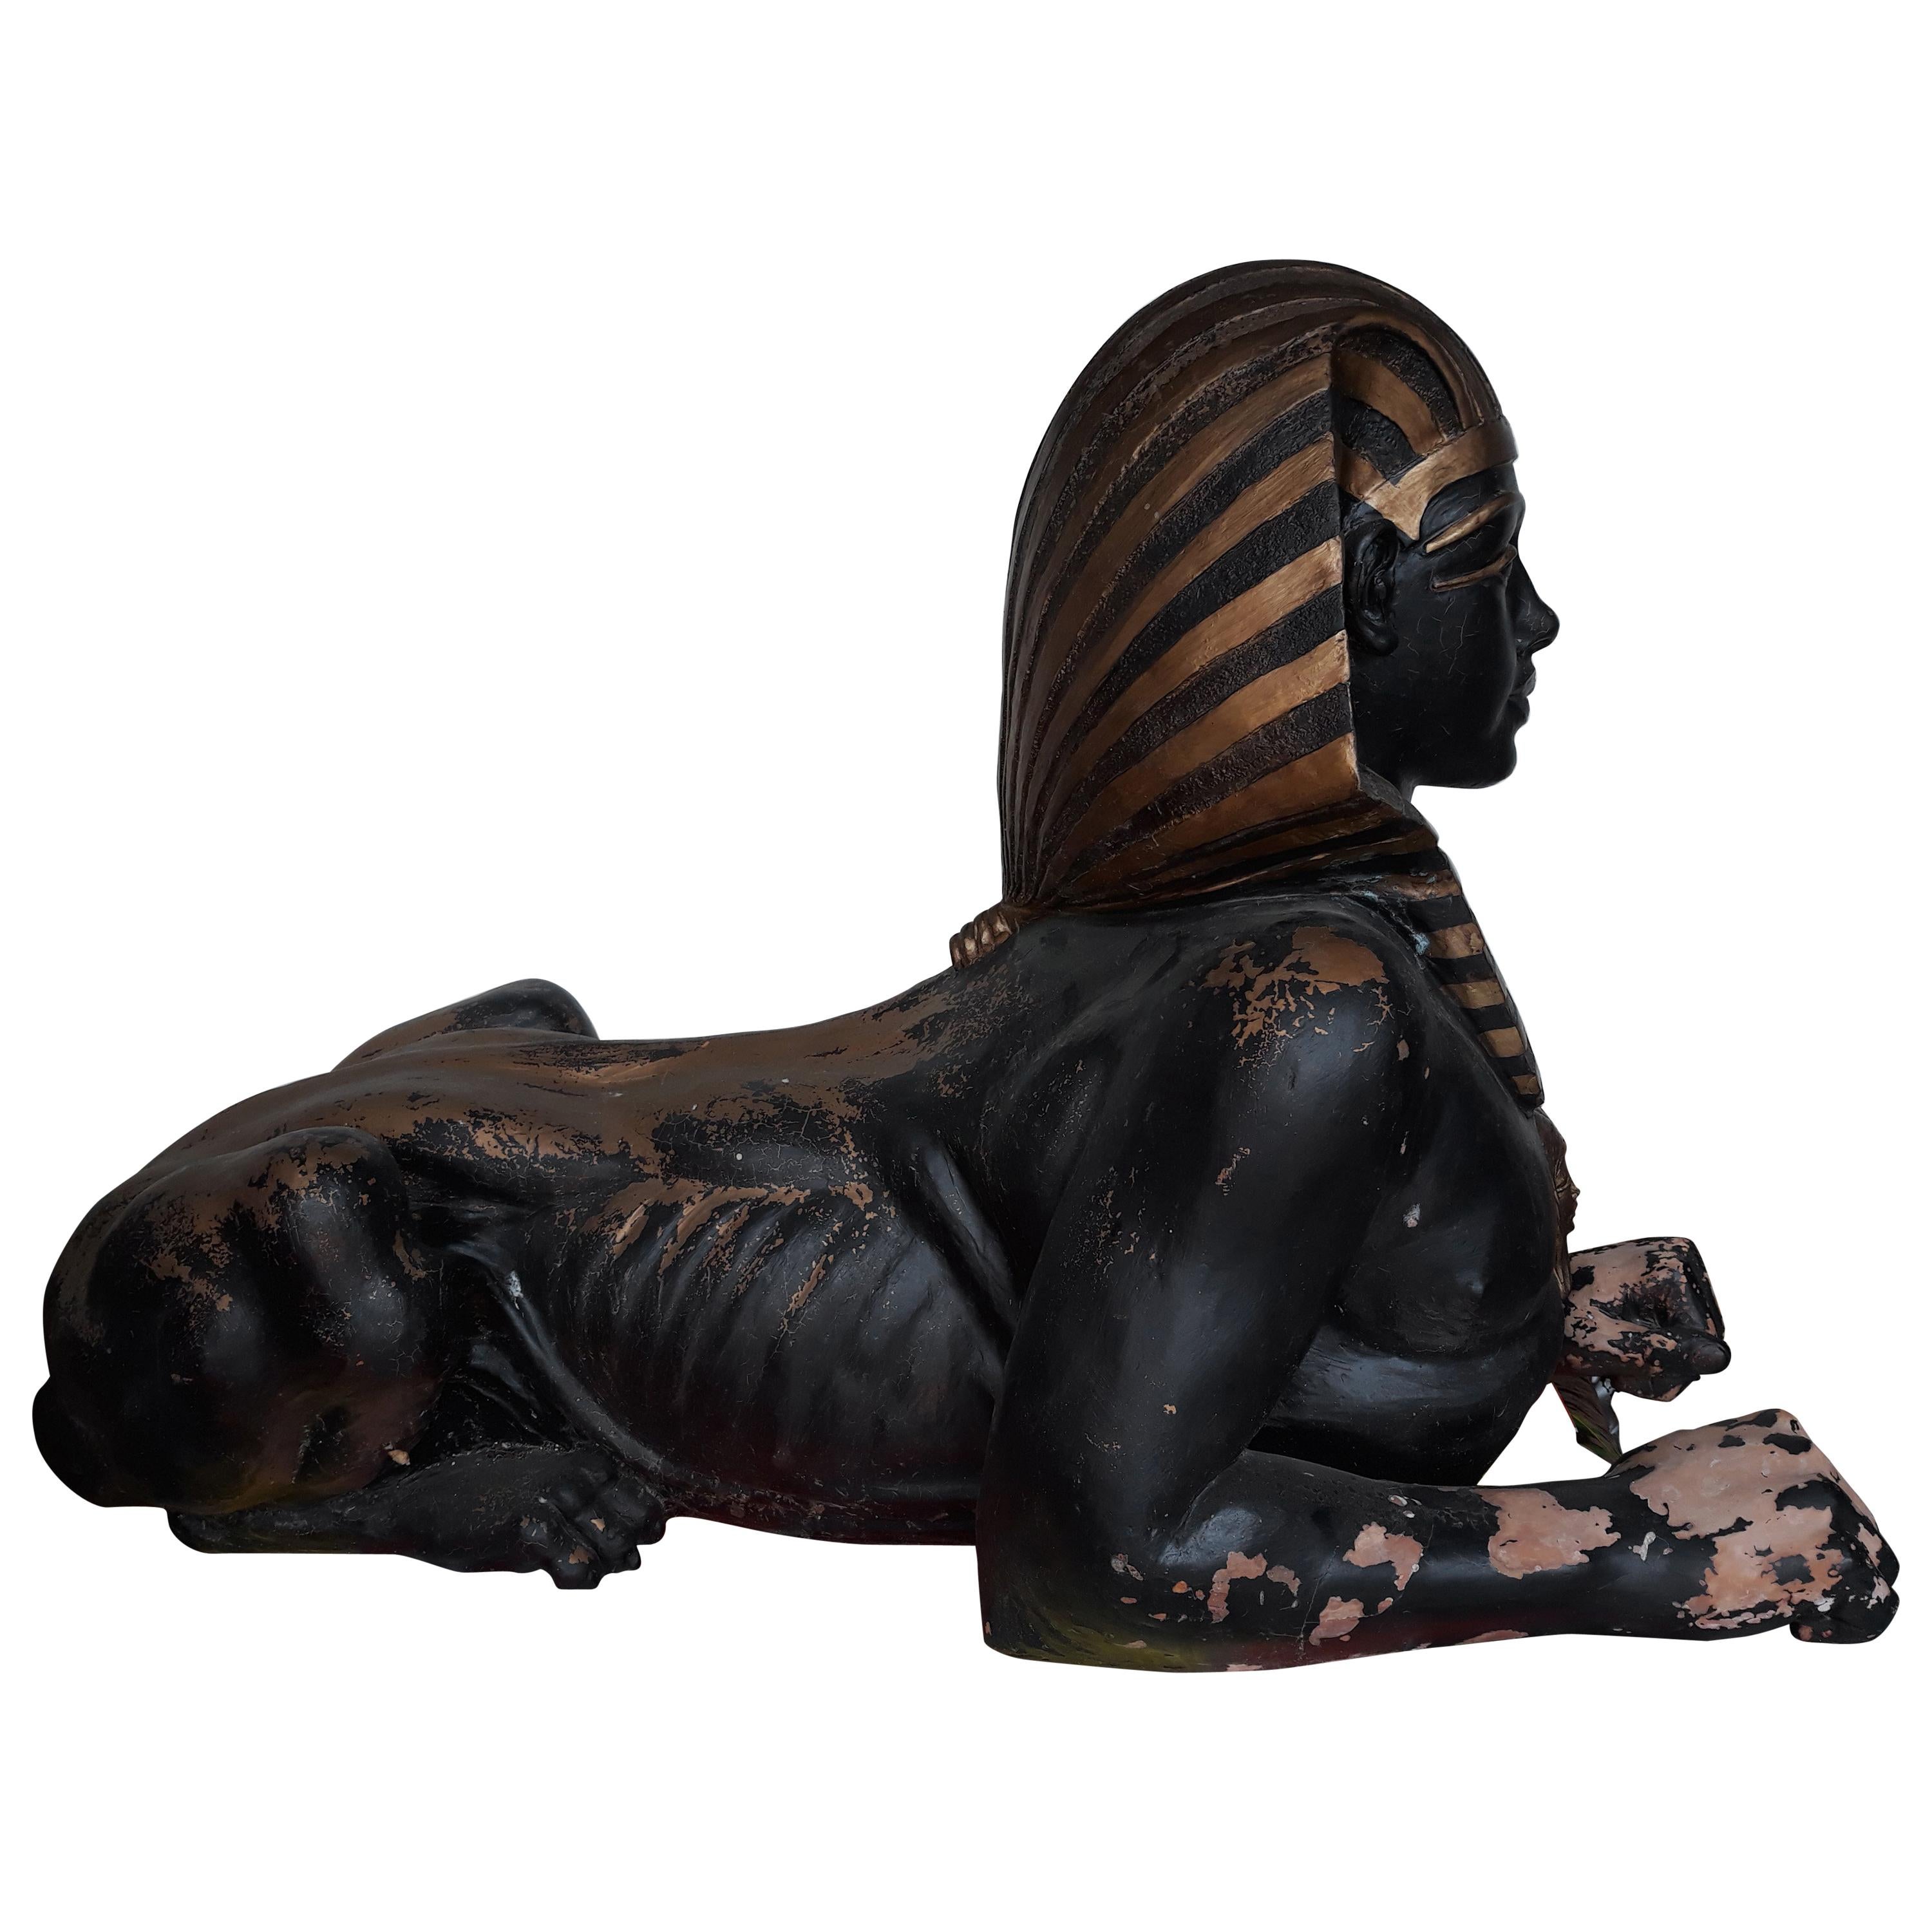 20th Century, Italy 1930 Terracotta Sphinx Decorated and Shaped by Hand For Sale